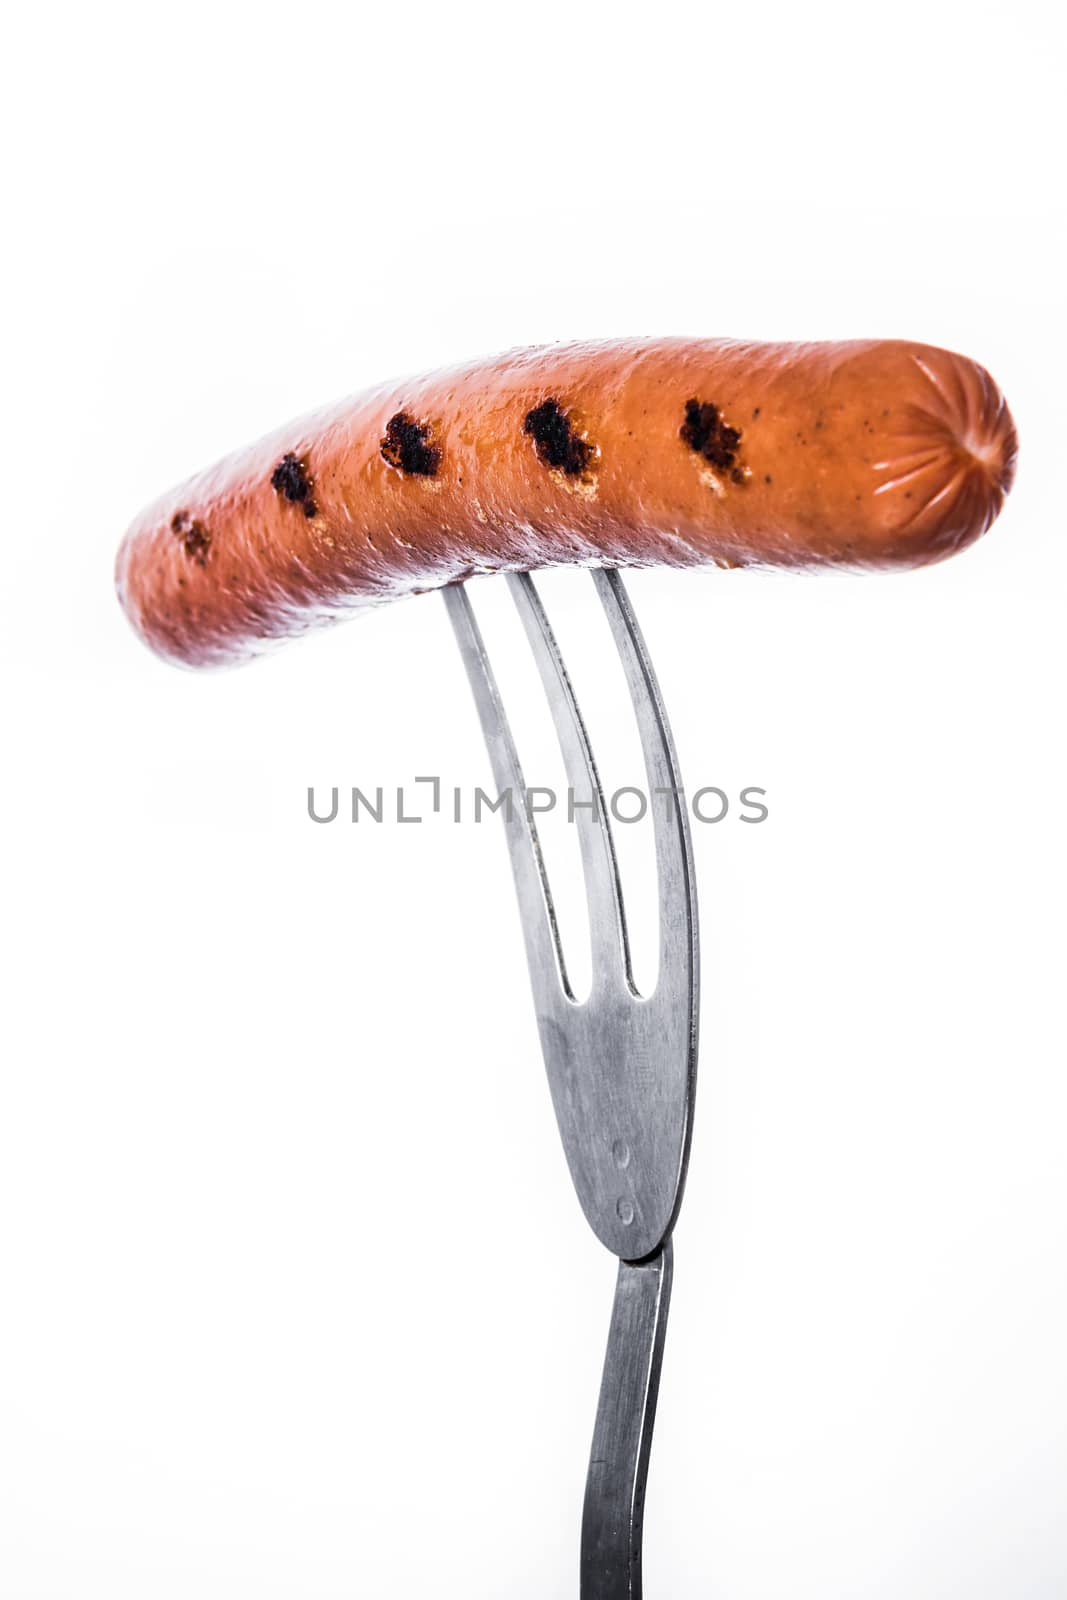 Grilled sausage on a fork isolated on white background